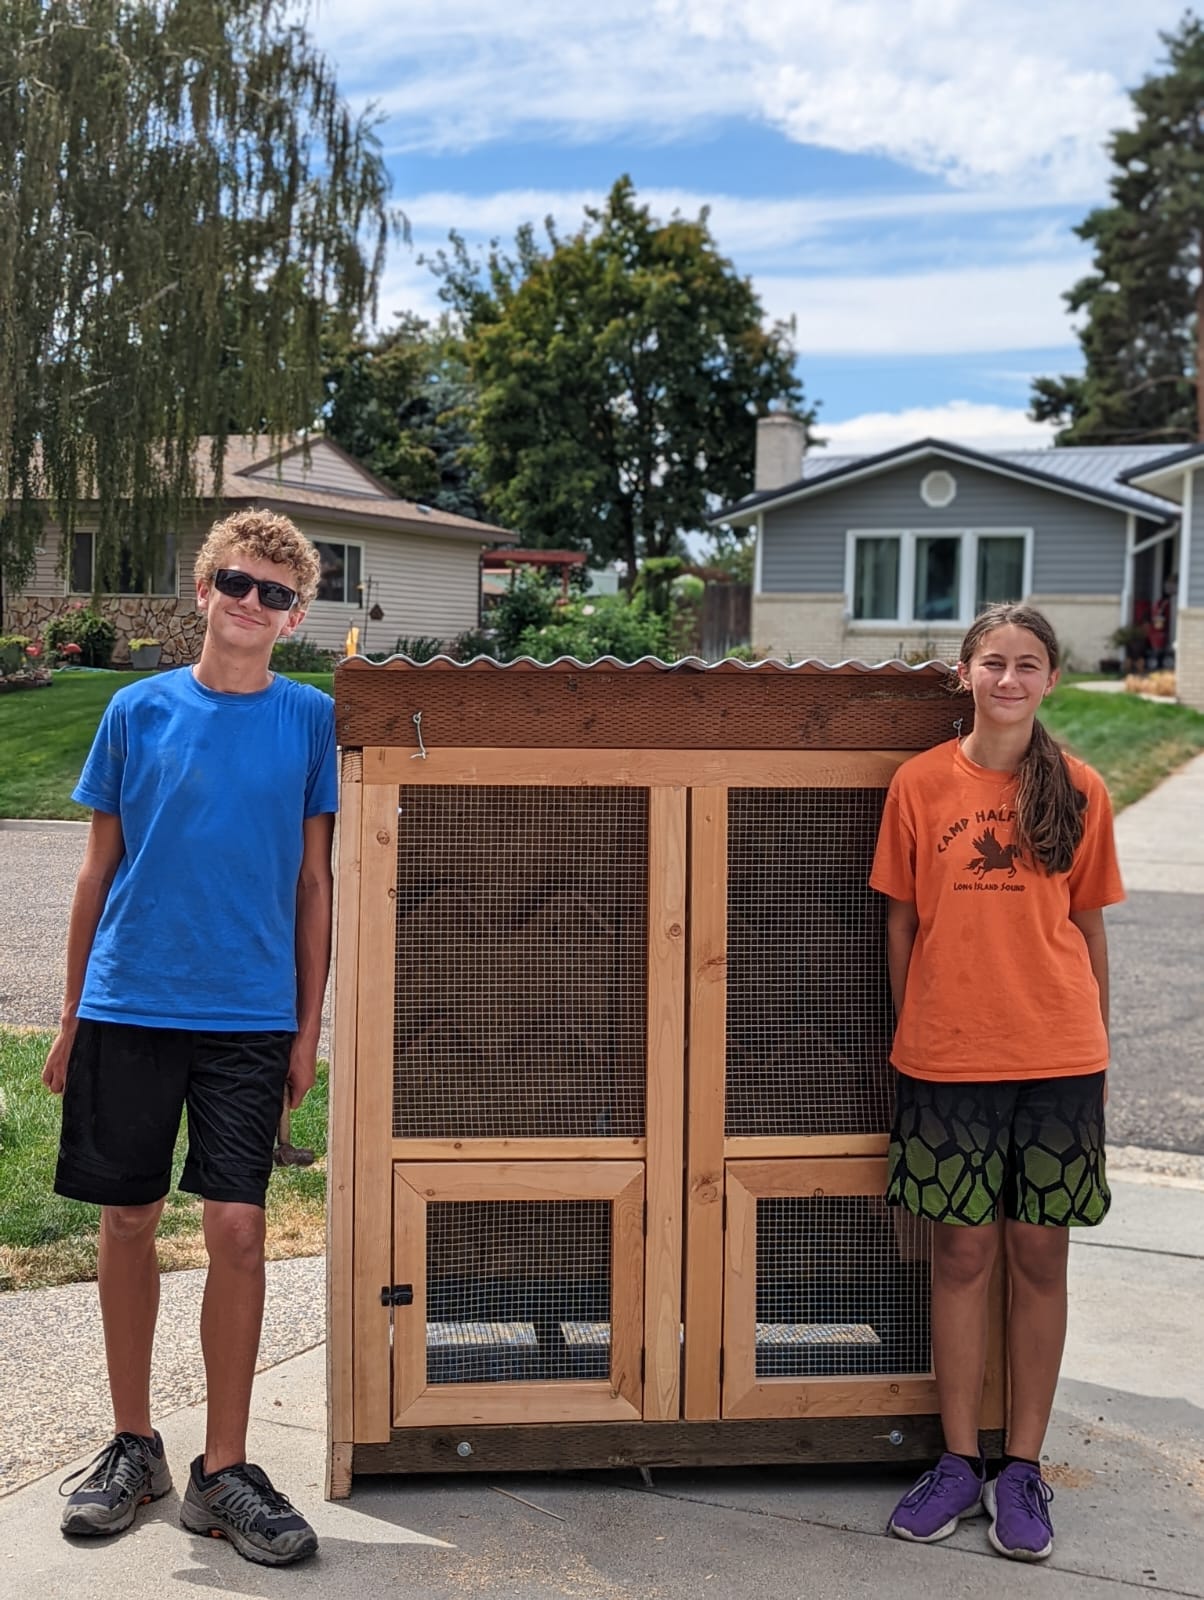 two teens stand next to a small wooden structure that looks similar to a chicken coop or rabbit hutch